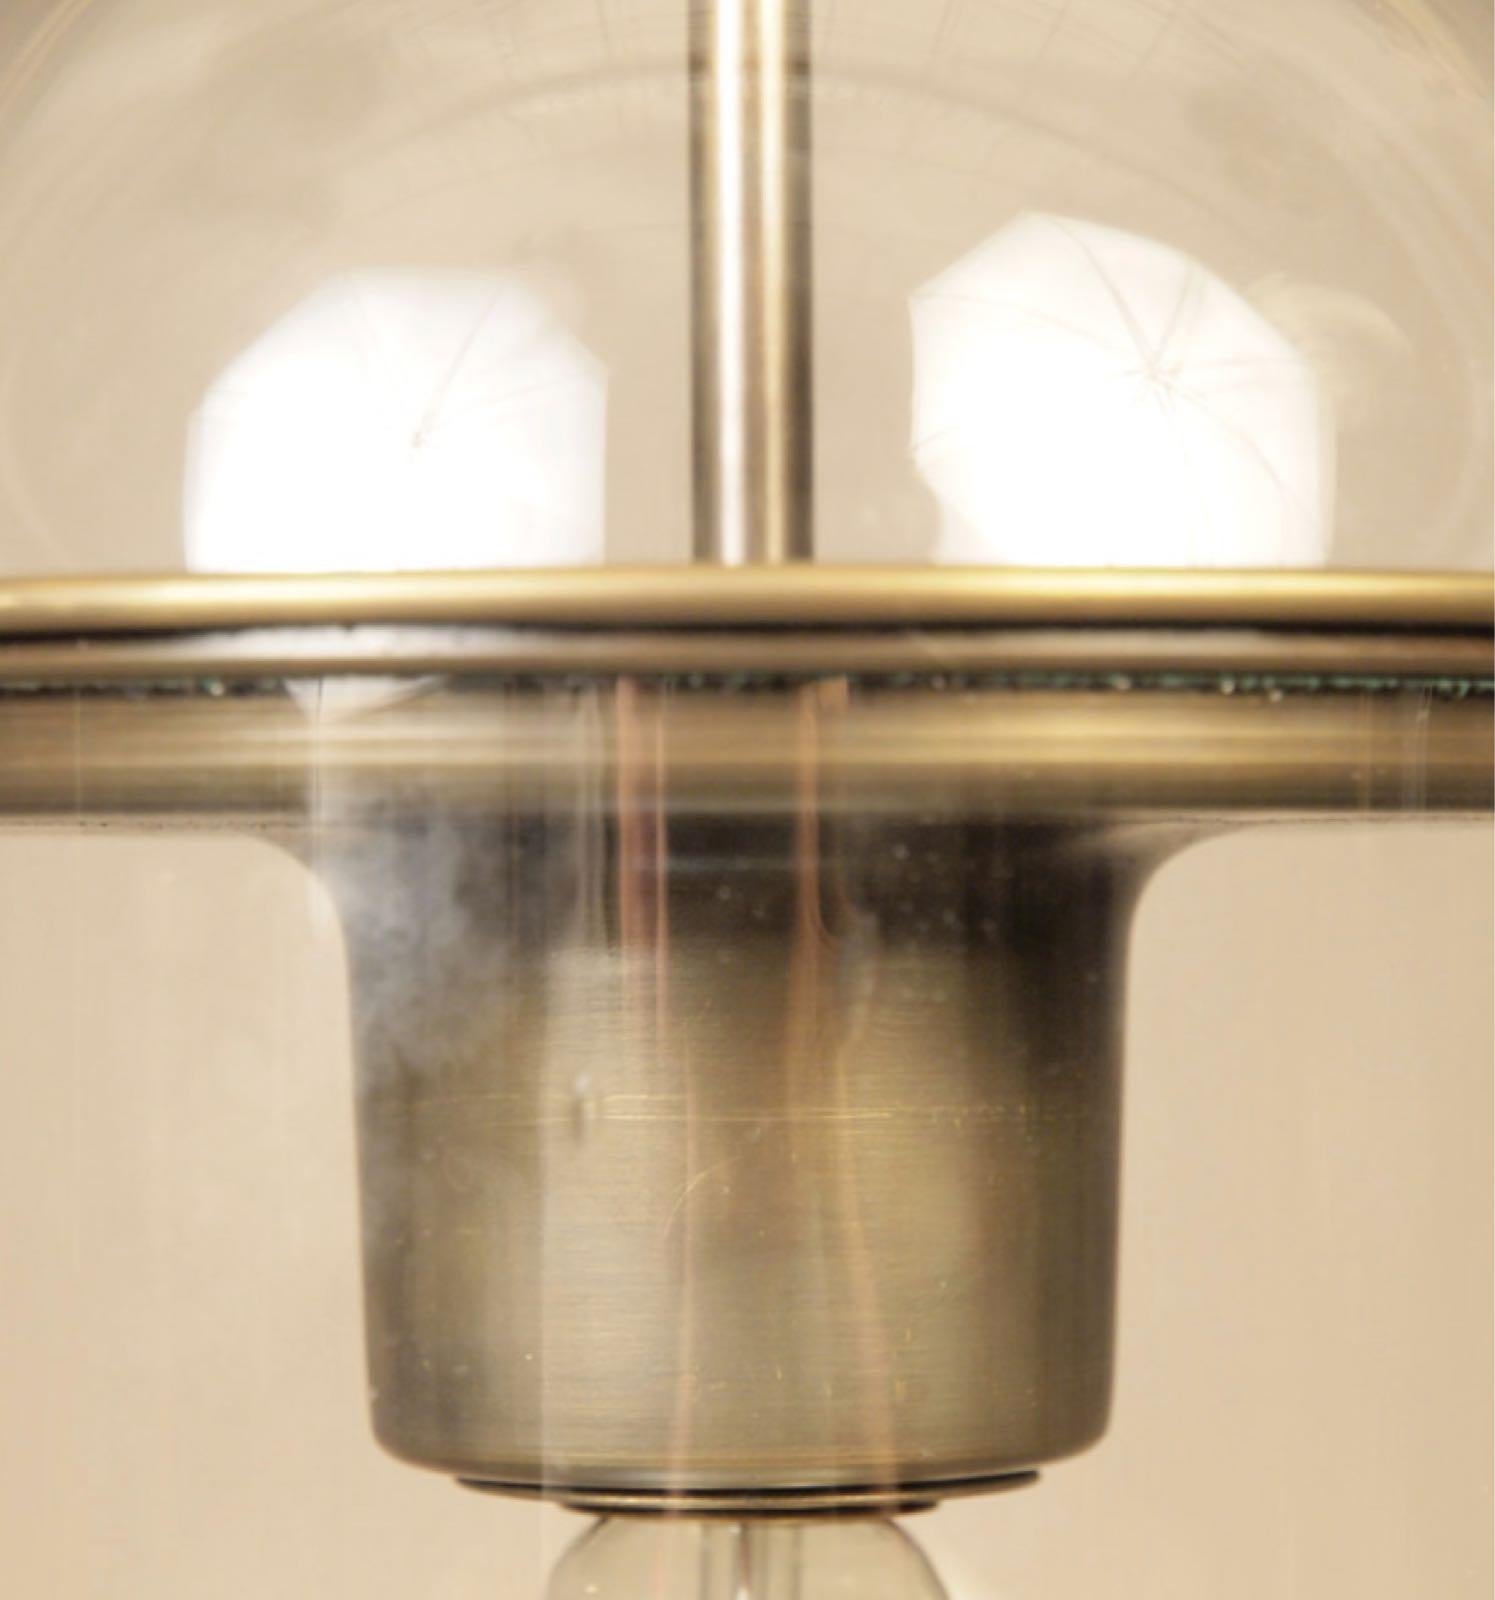 A sophisticated capsule-shaped pendant light.
We have only one stock.